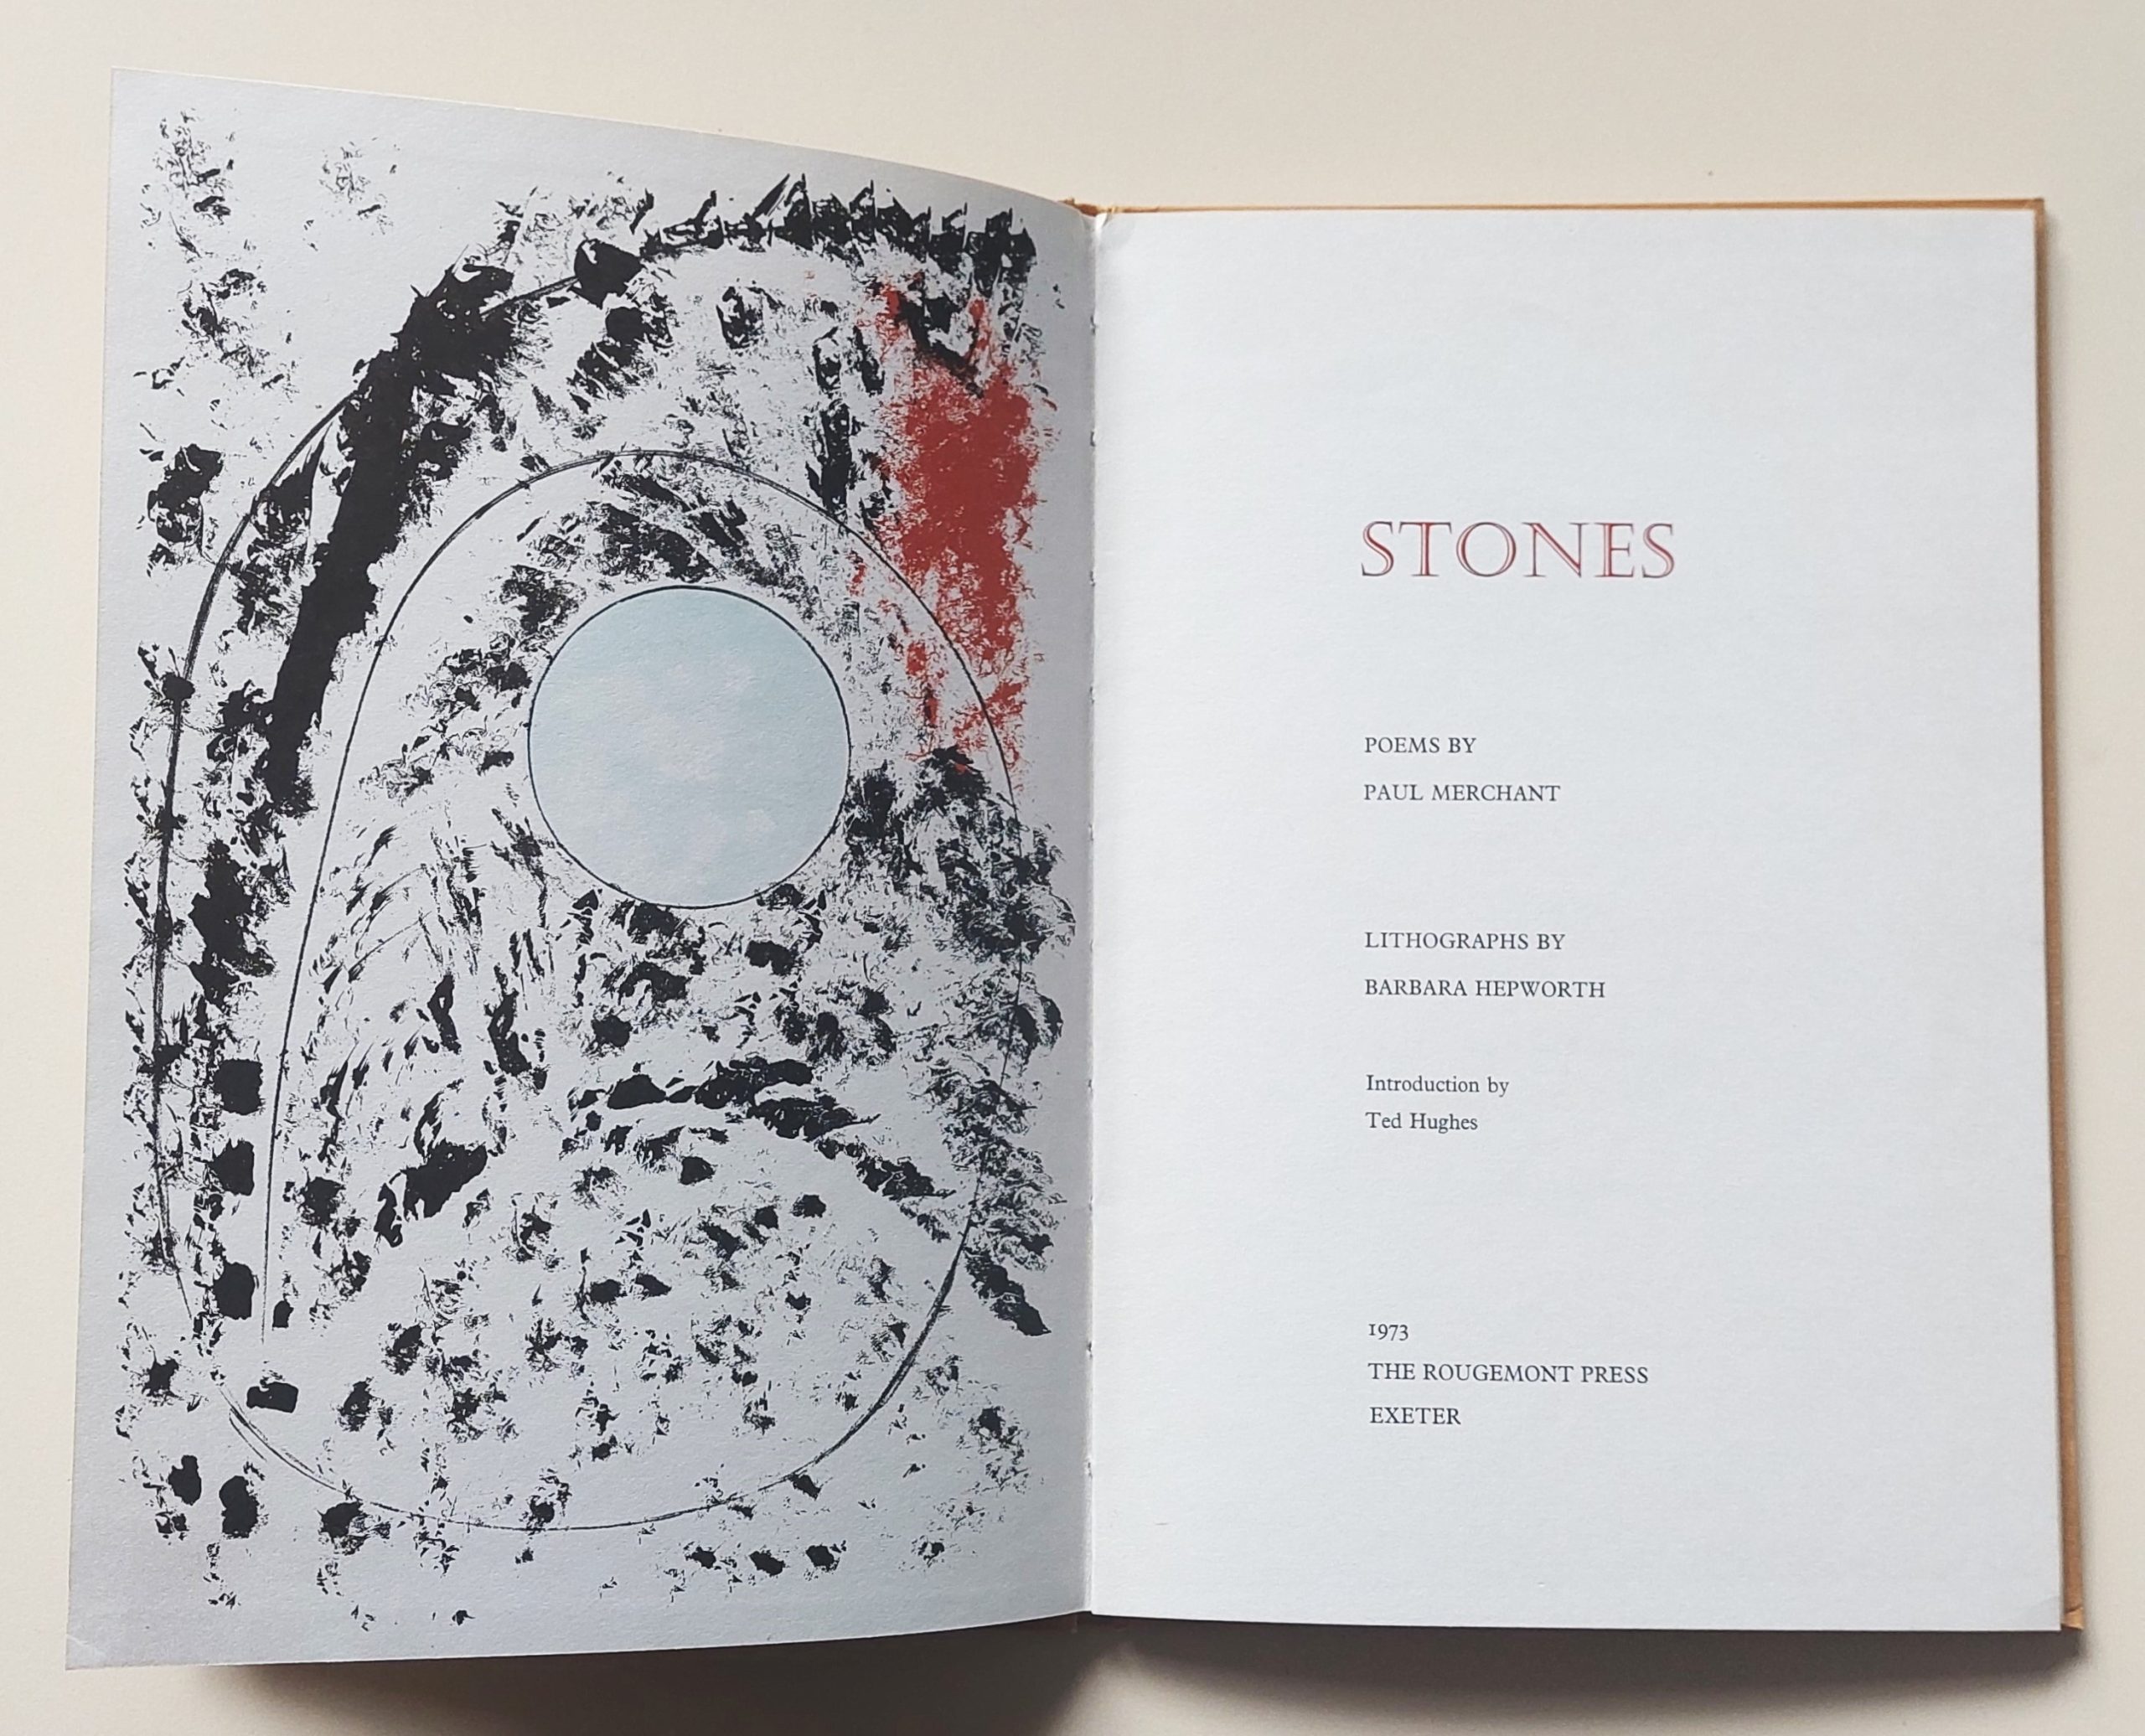 PAUL MERCHANT - Stones. Poems by Paul Merchant. Lithographs by Barbara Hepworth. Introduction by Ted Hughes